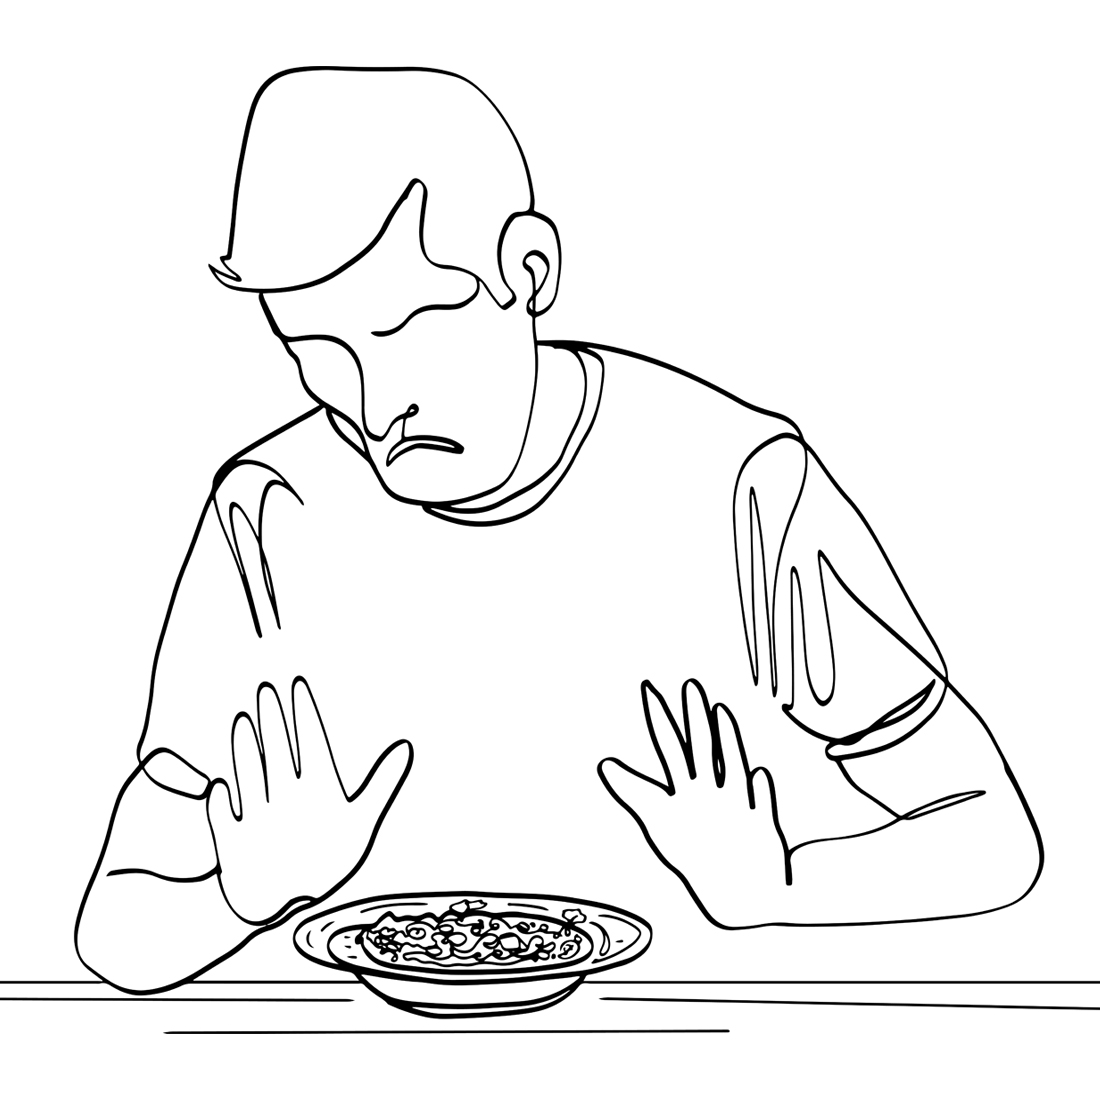 Food Rejection Saga: Vector Image of Coping with Illness and No Appetite, Battling Hunger Amidst Illness: Hand-Drawn Cartoon Illustration, Dealing with No Appetite preview image.